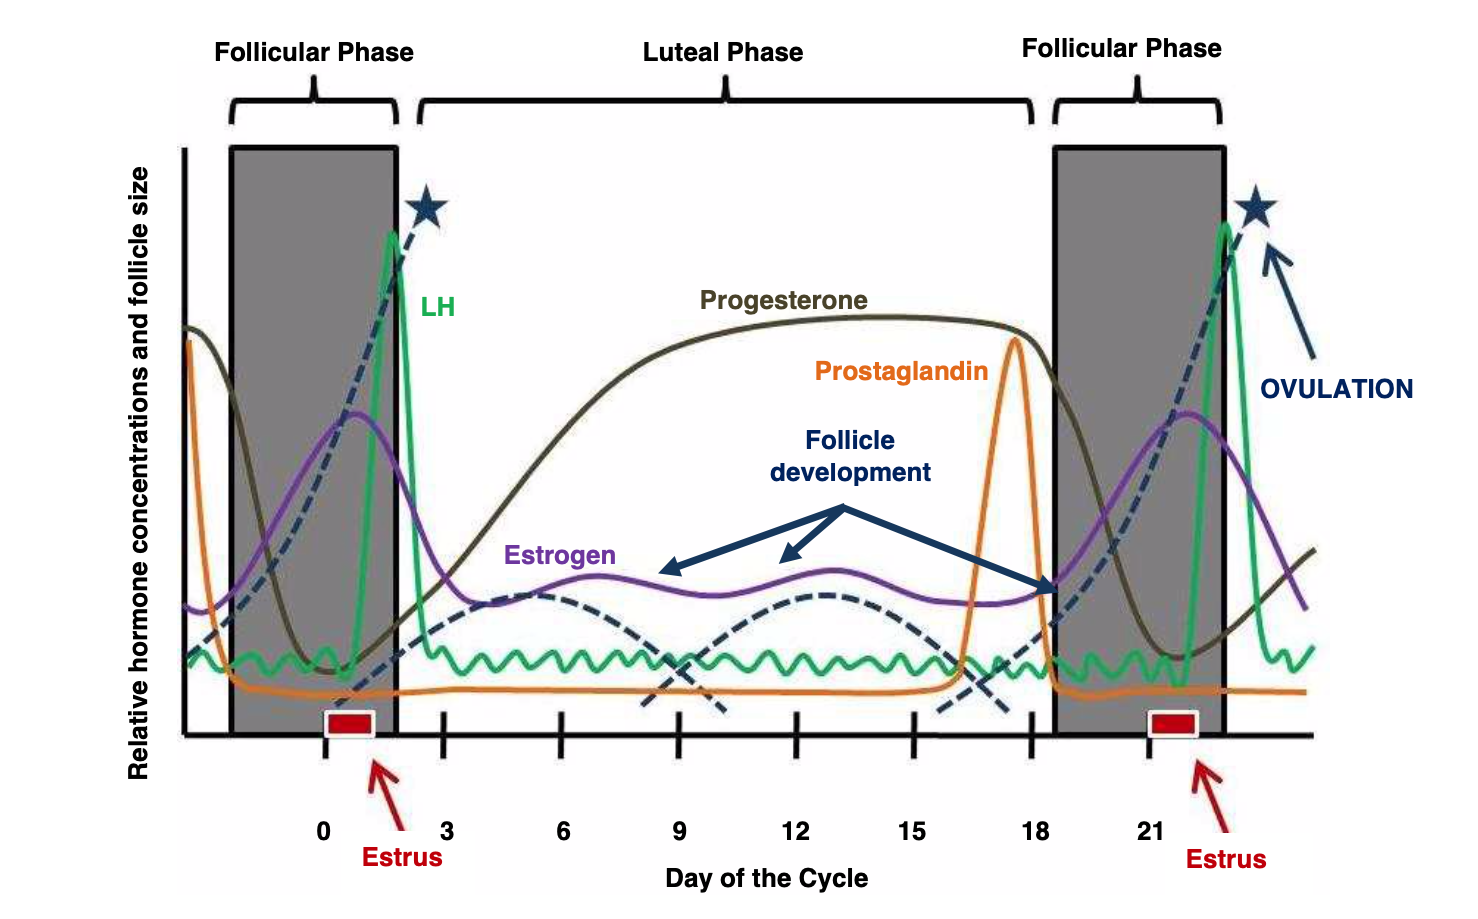 Hormonal profile and follicular development during the estrous cycles in cows.